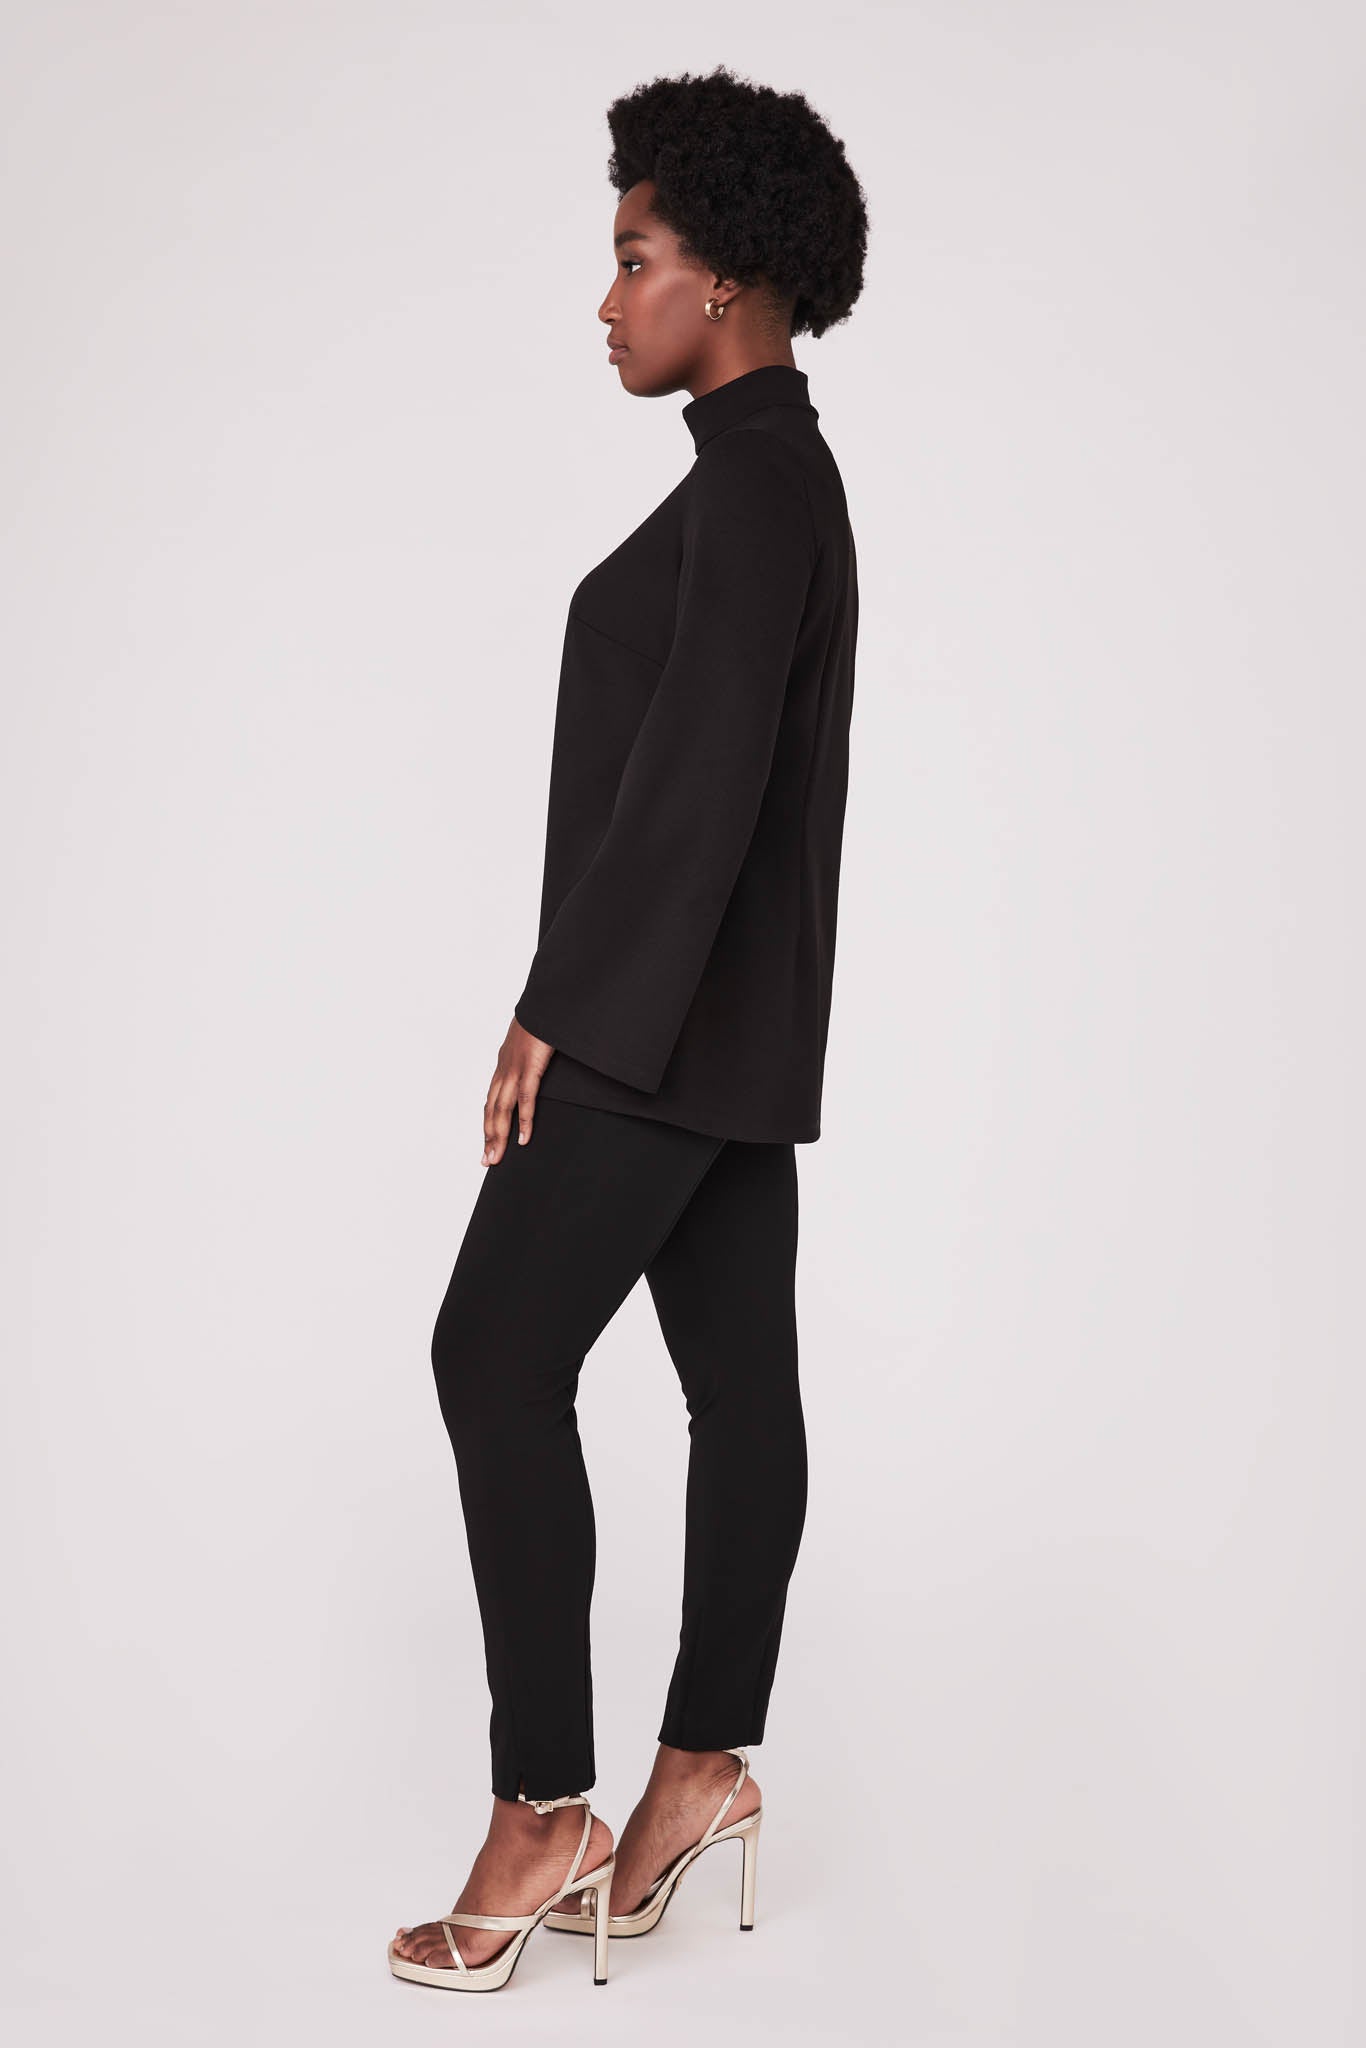 Side view of a woman wearing a black fuller bust tunic style top with flared sleeves in stretch crepe fabric designed by Miriam Baker.